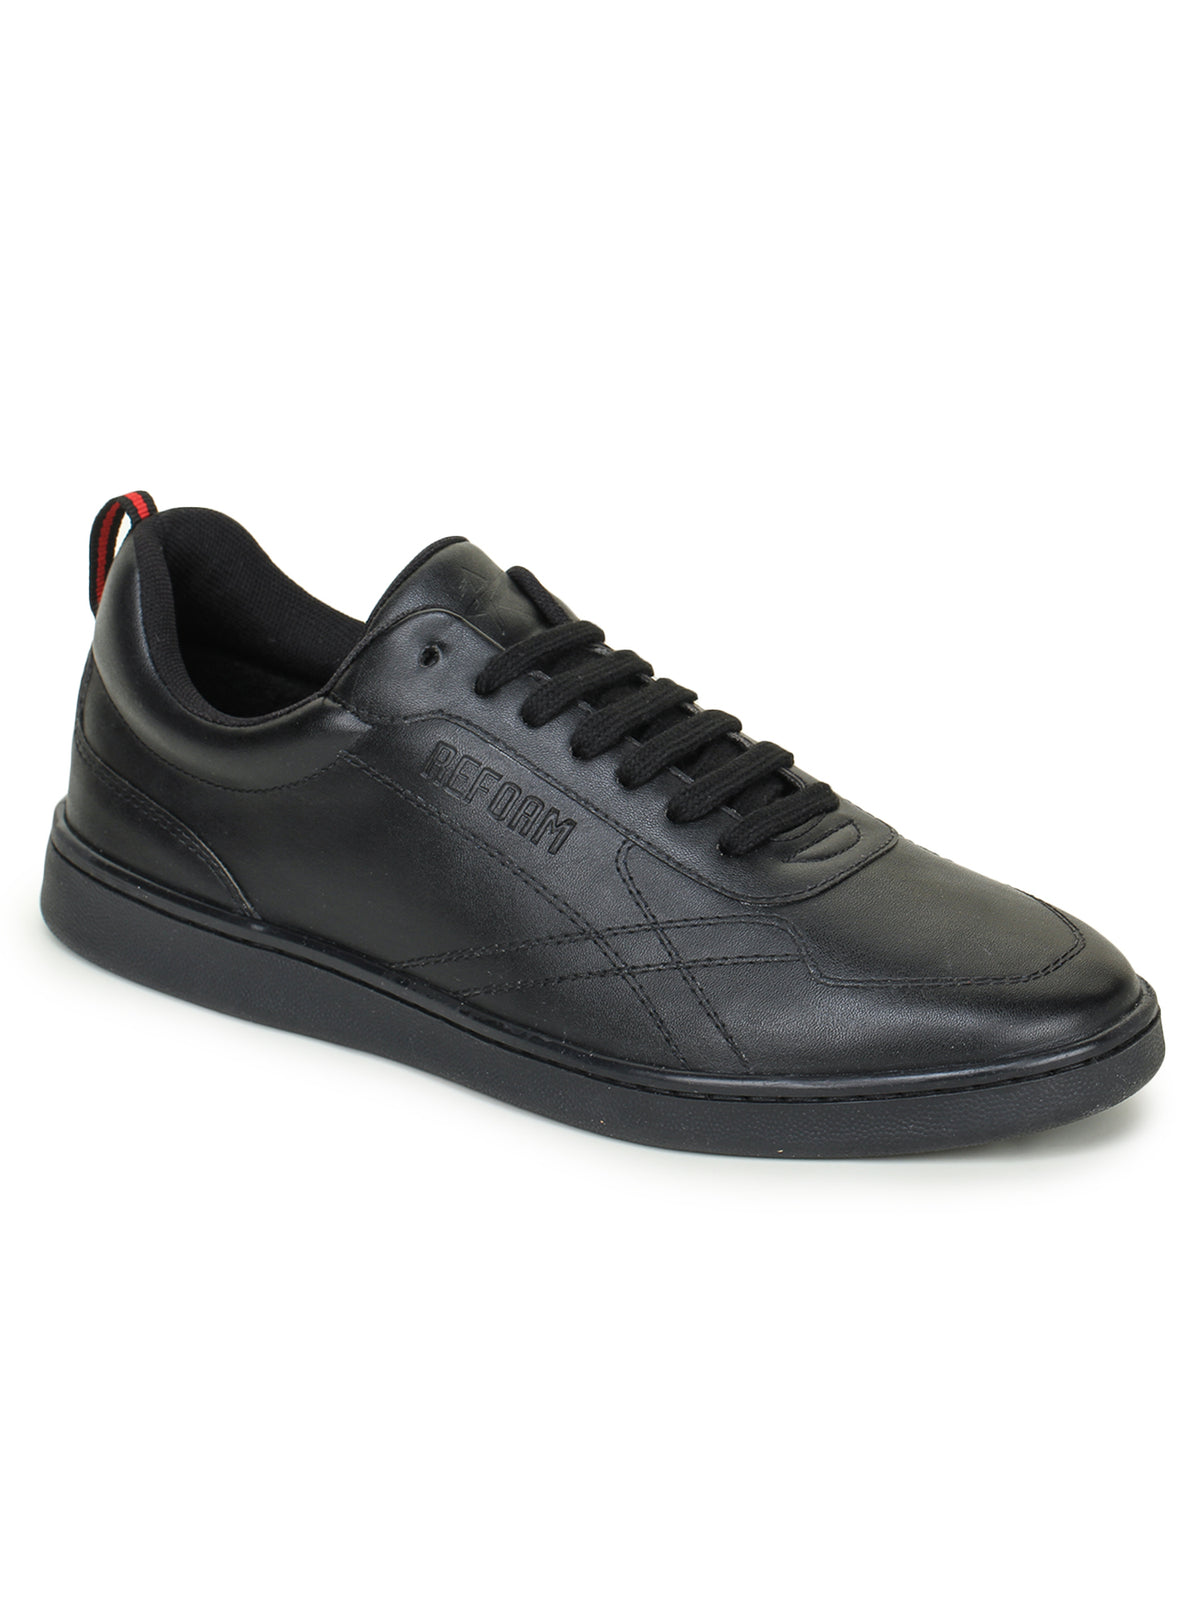 All Black Amazing Pave Sneaker - Essential Elements Chicago